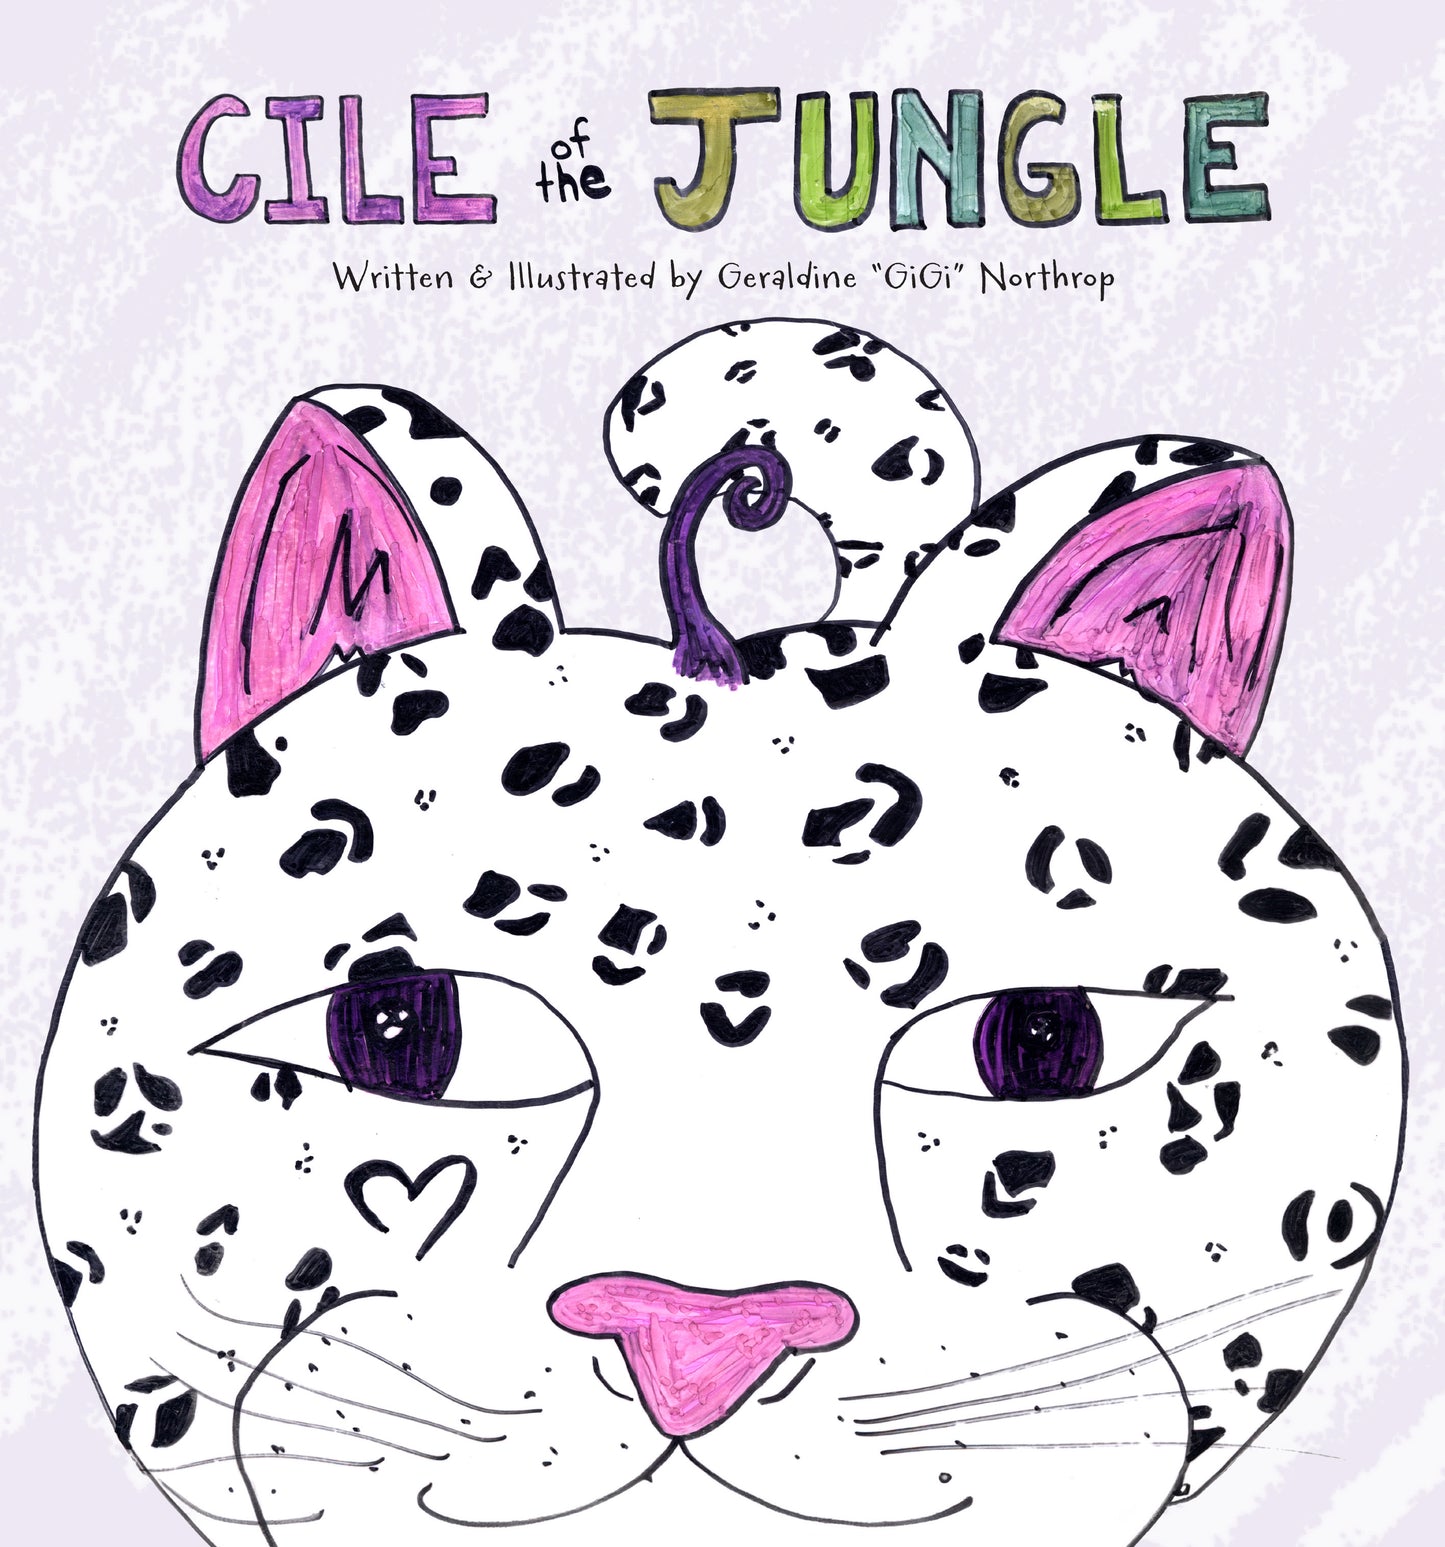 CILE of the Jungle